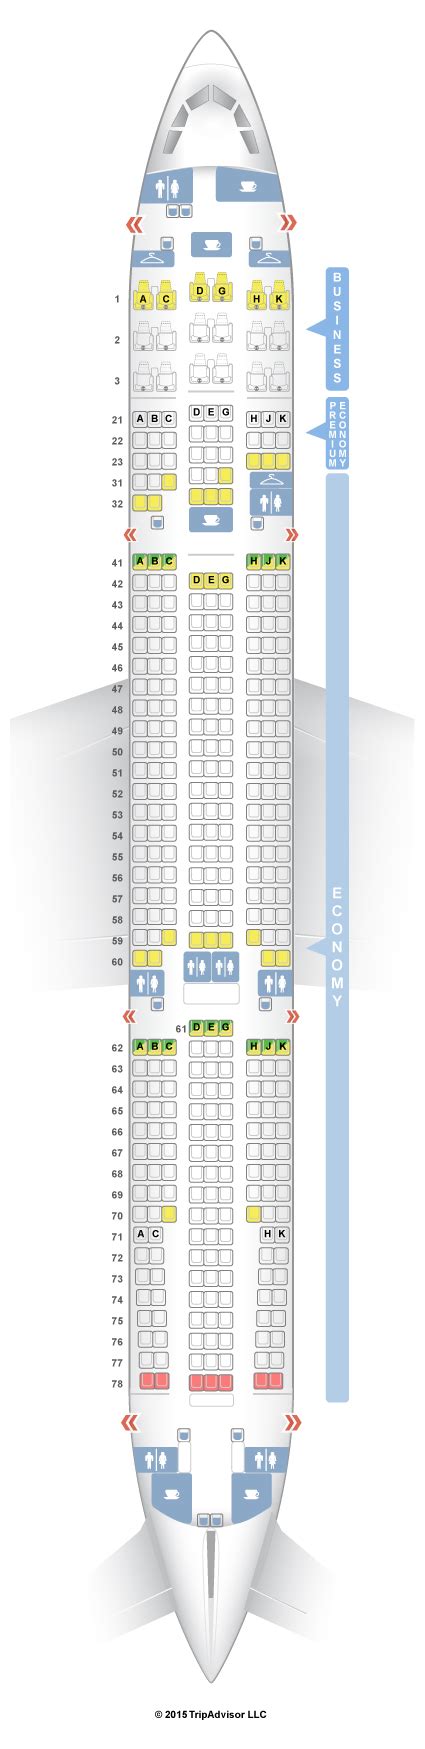 Philippine Airlines Airbus A330 Seat Map